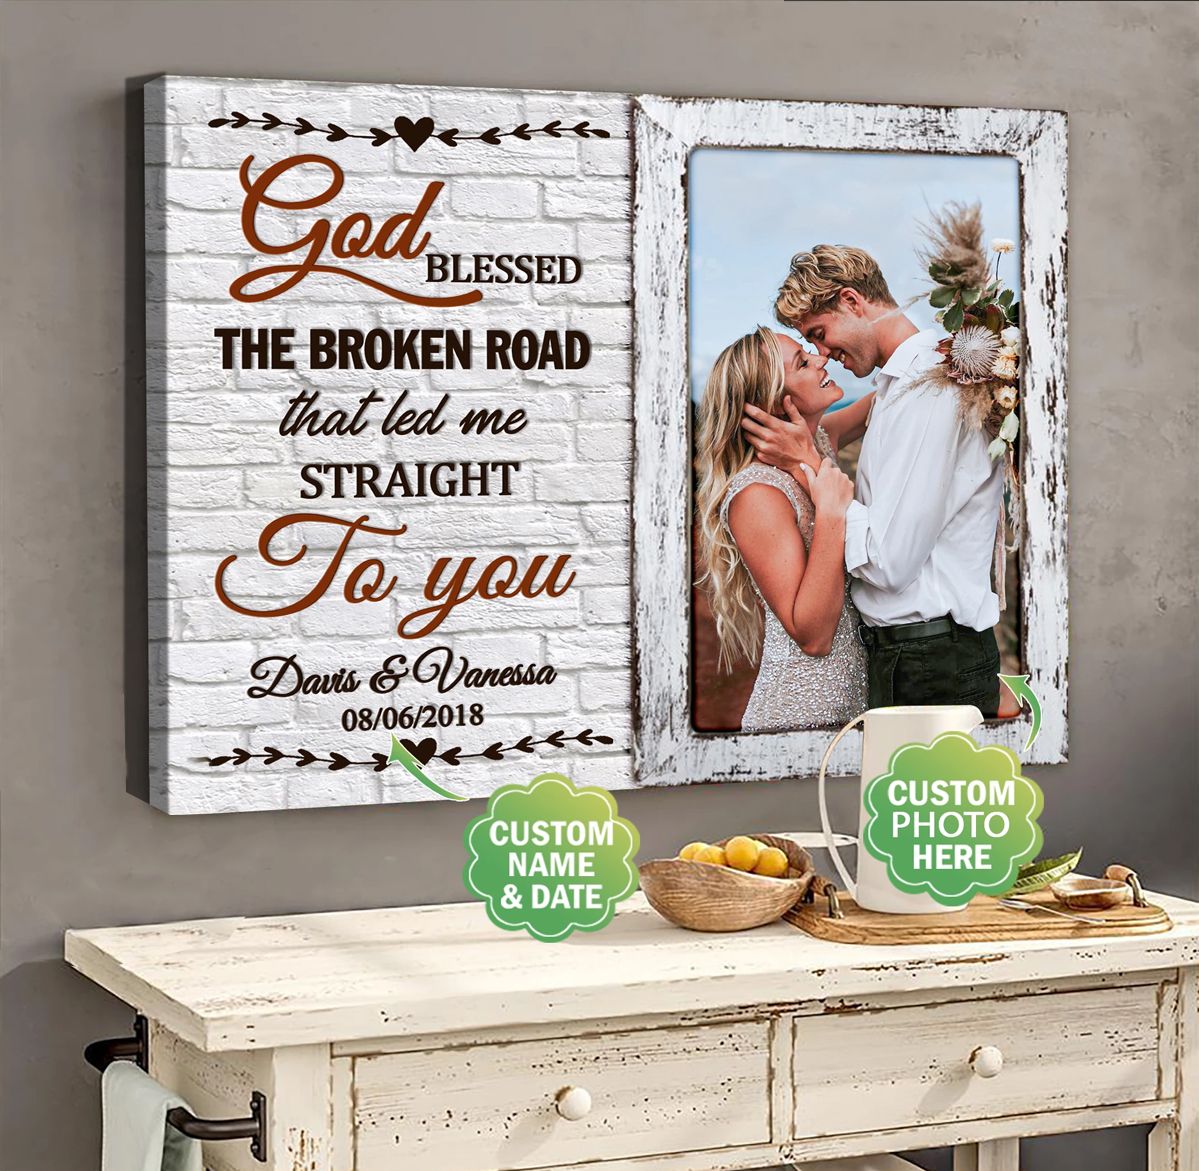 Personalized Valentine Gift Canvas Prints - God Blessed The Broken Road PAN